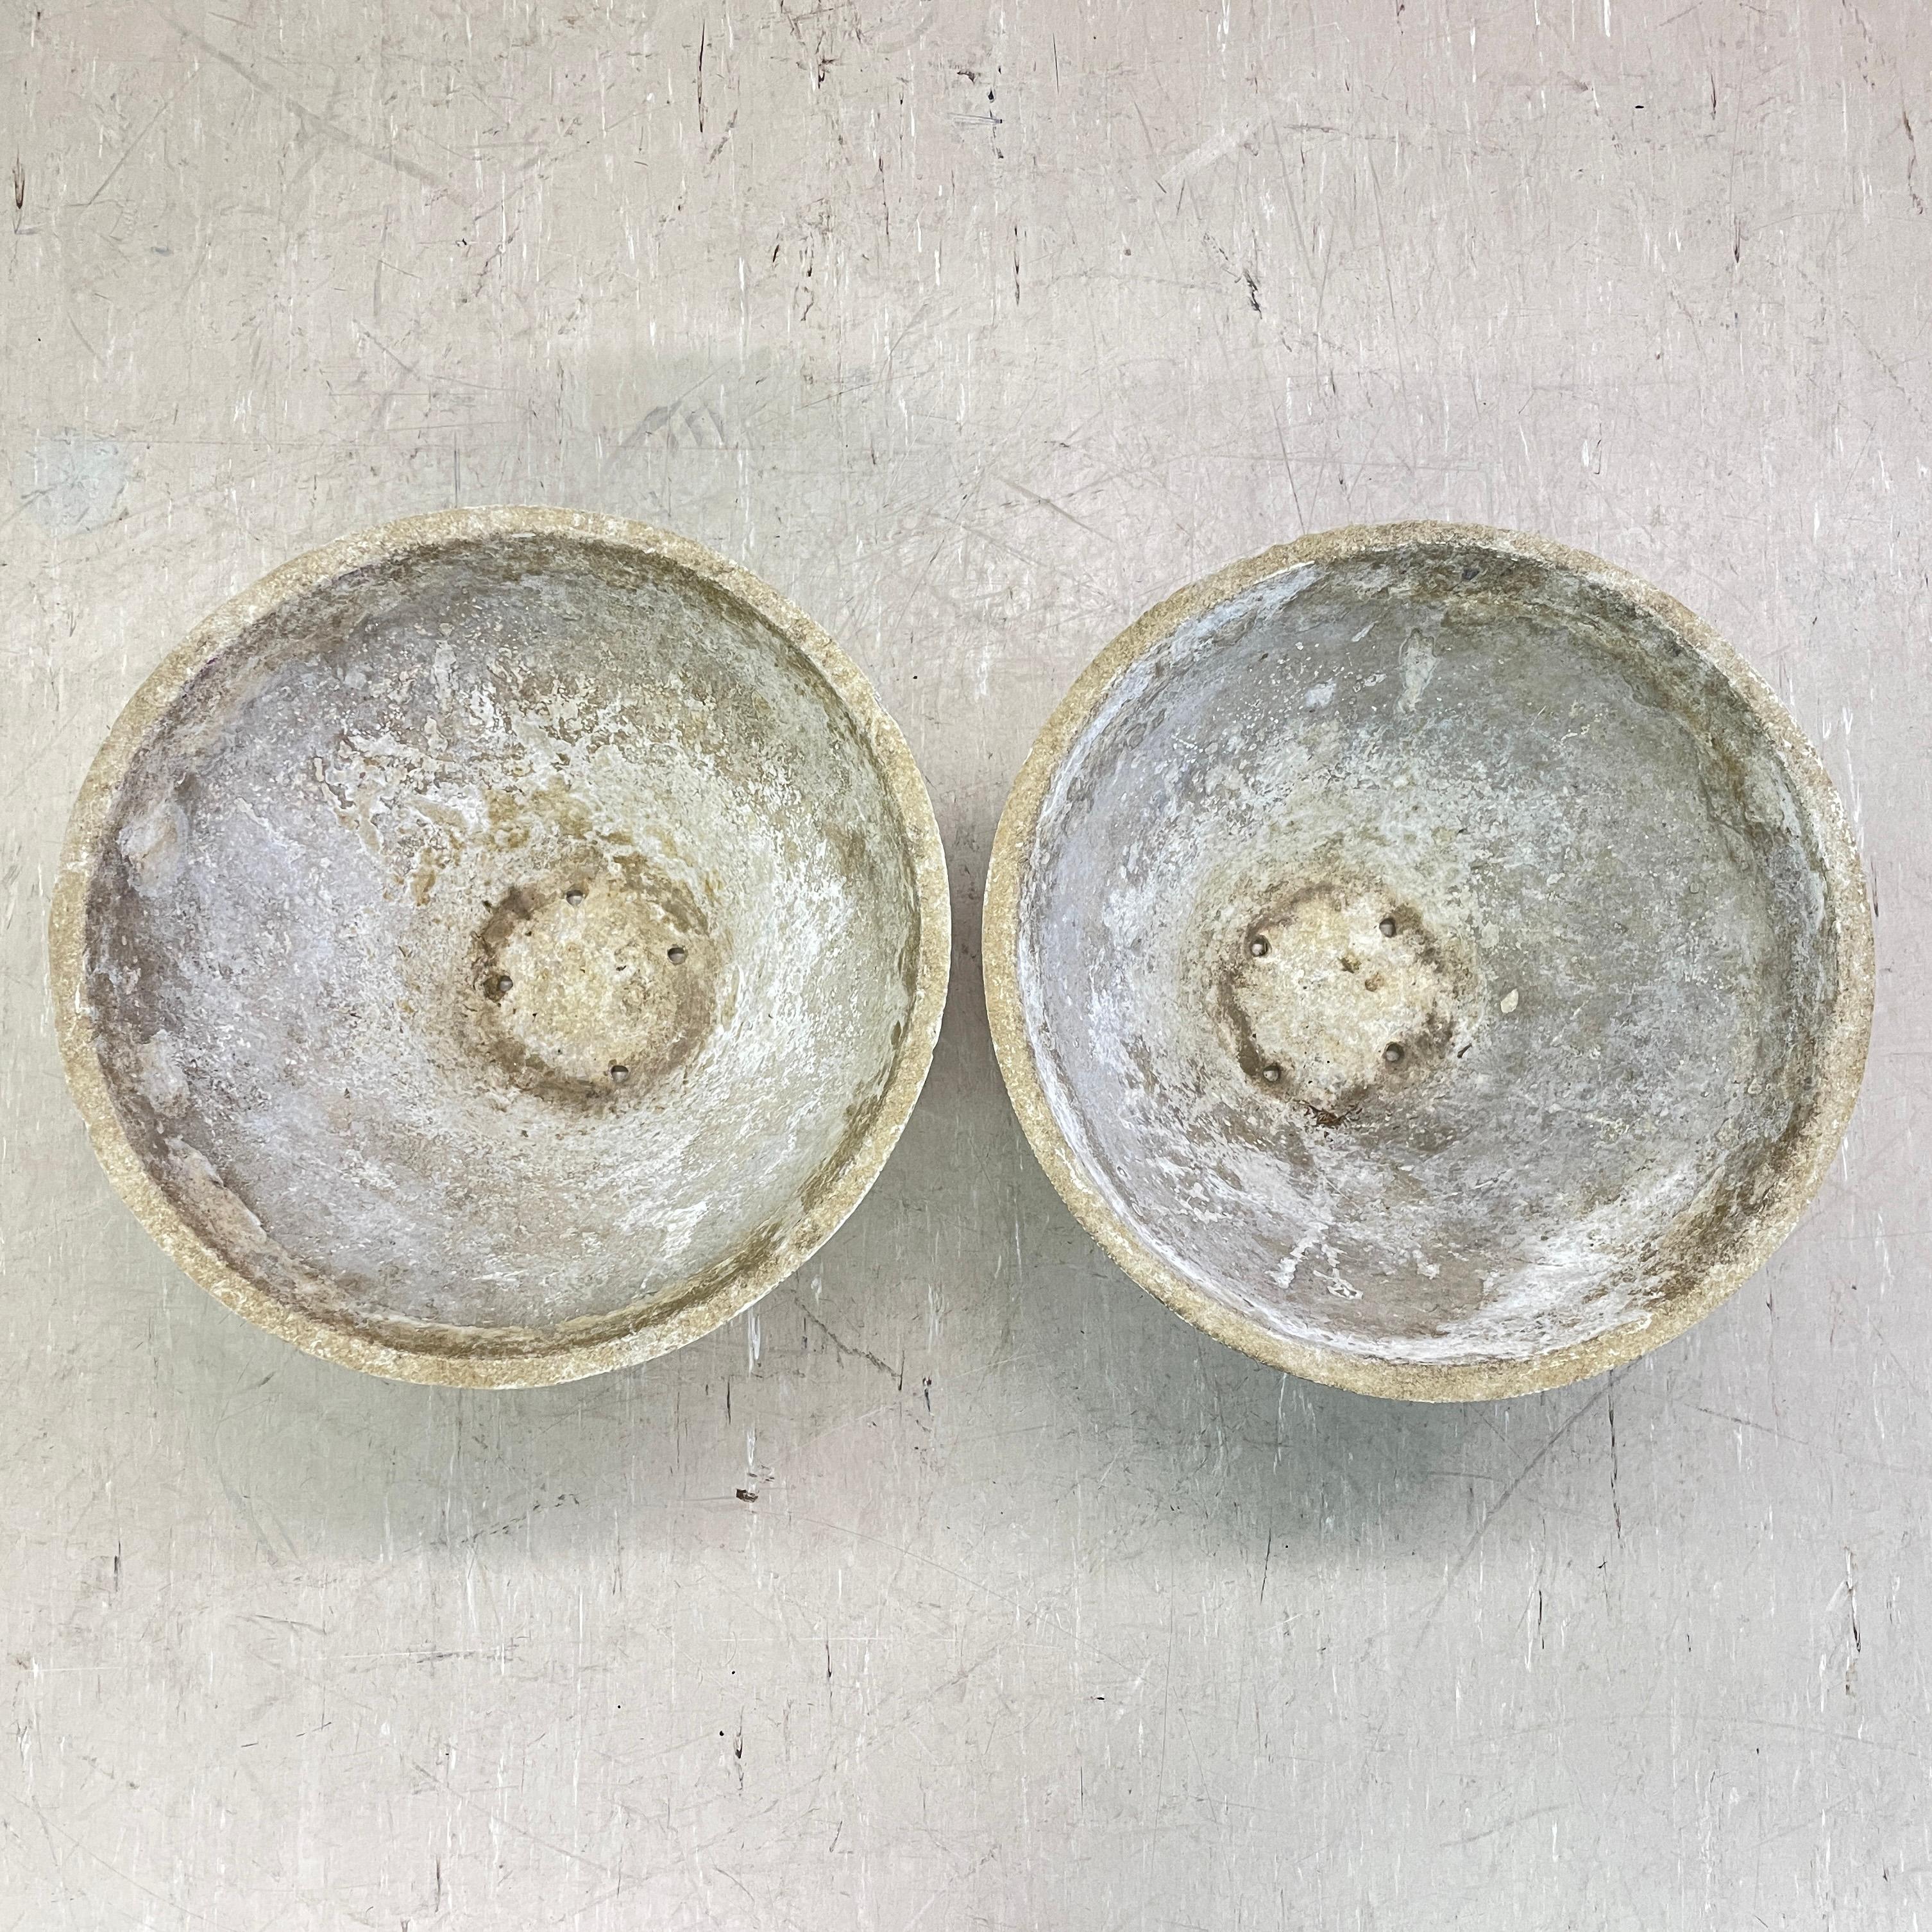 Pair of minimalist conical concrete flower pot by prominent Swiss designer, Willy Guhl. Solid concrete made in Switzerland 1960 - 1970. Produced by Eternit AG, Switzerland. Tapered structure with drainage holes. In original condition with beautiful